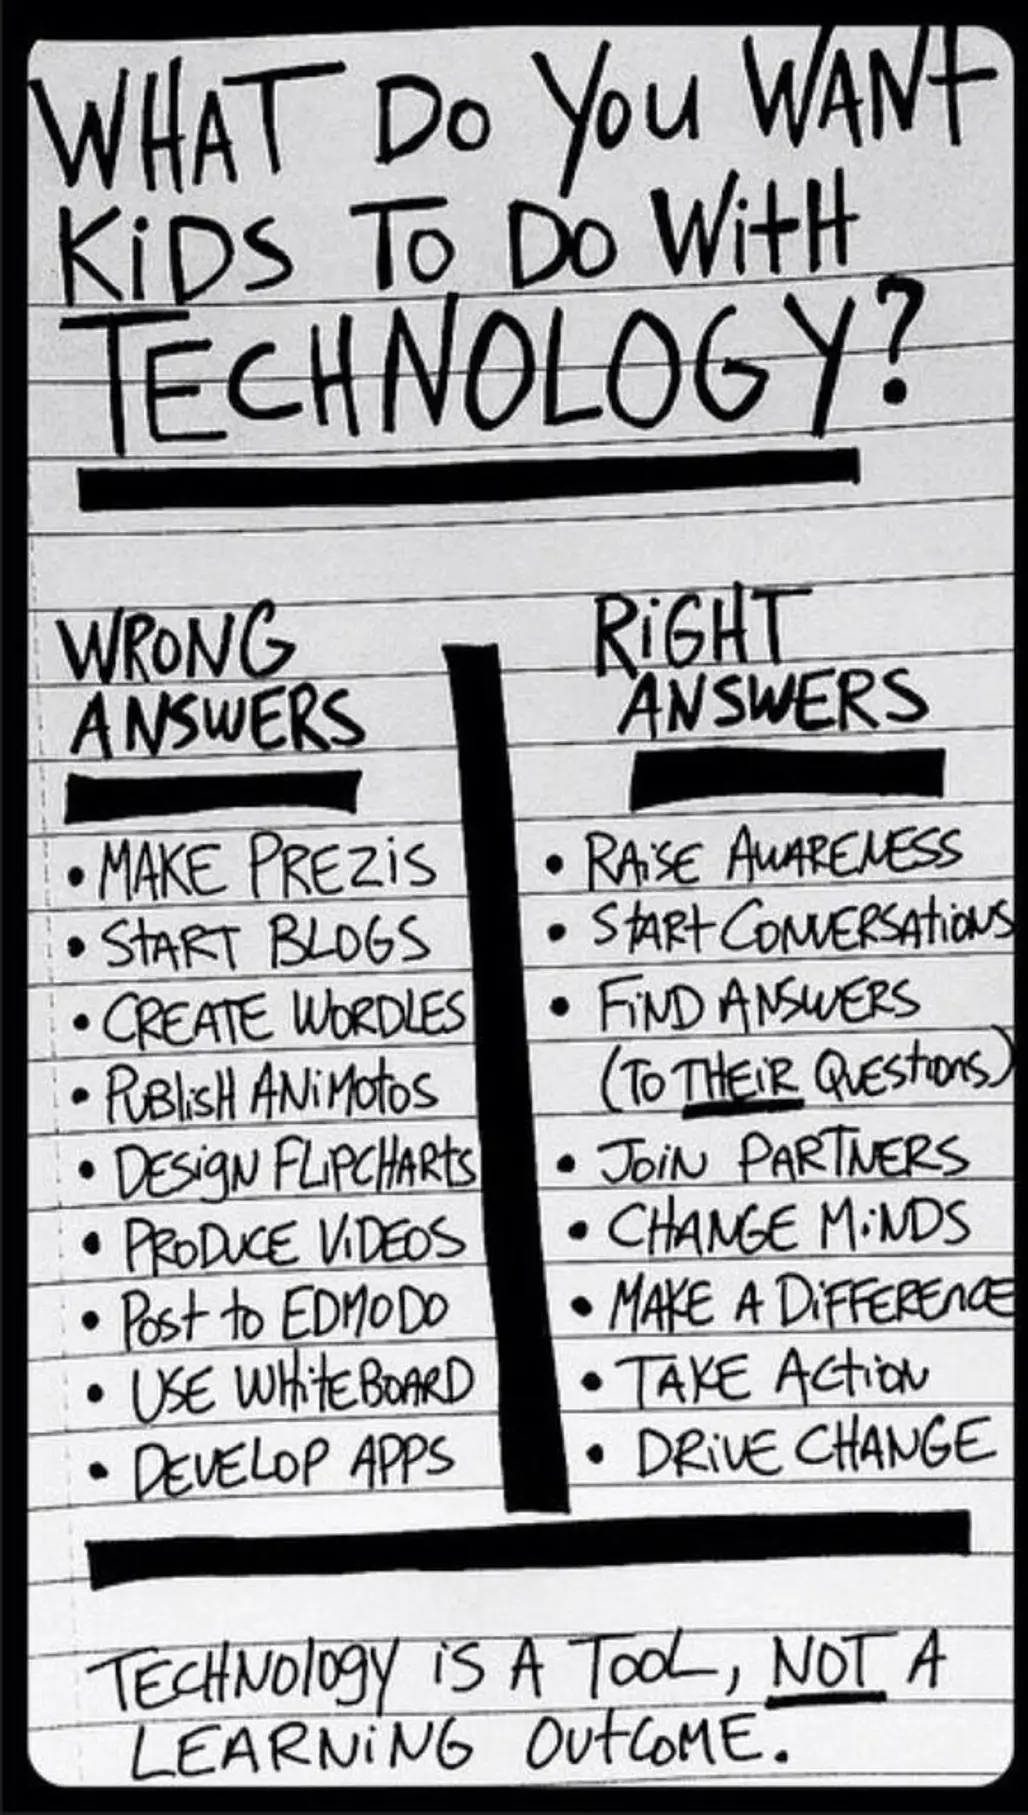 9 Wrong and 8 Right Ways Students Should Use Technology